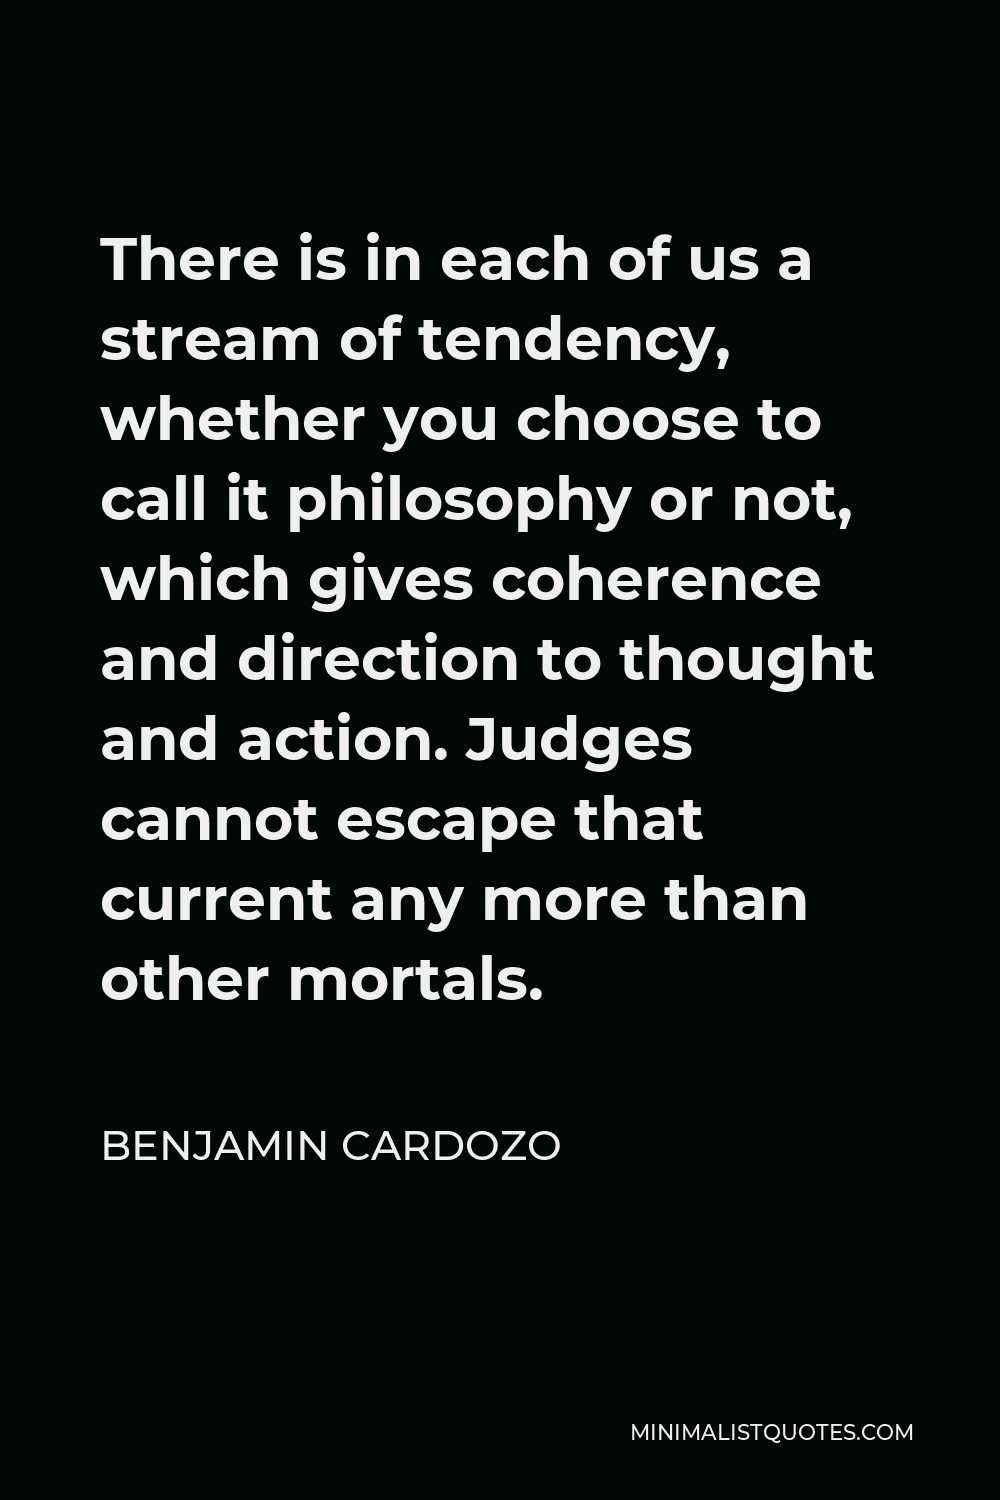 Benjamin Cardozo Quote - There is in each of us a stream of tendency, whether you choose to call it philosophy or not, which gives coherence and direction to thought and action. Judges cannot escape that current any more than other mortals.